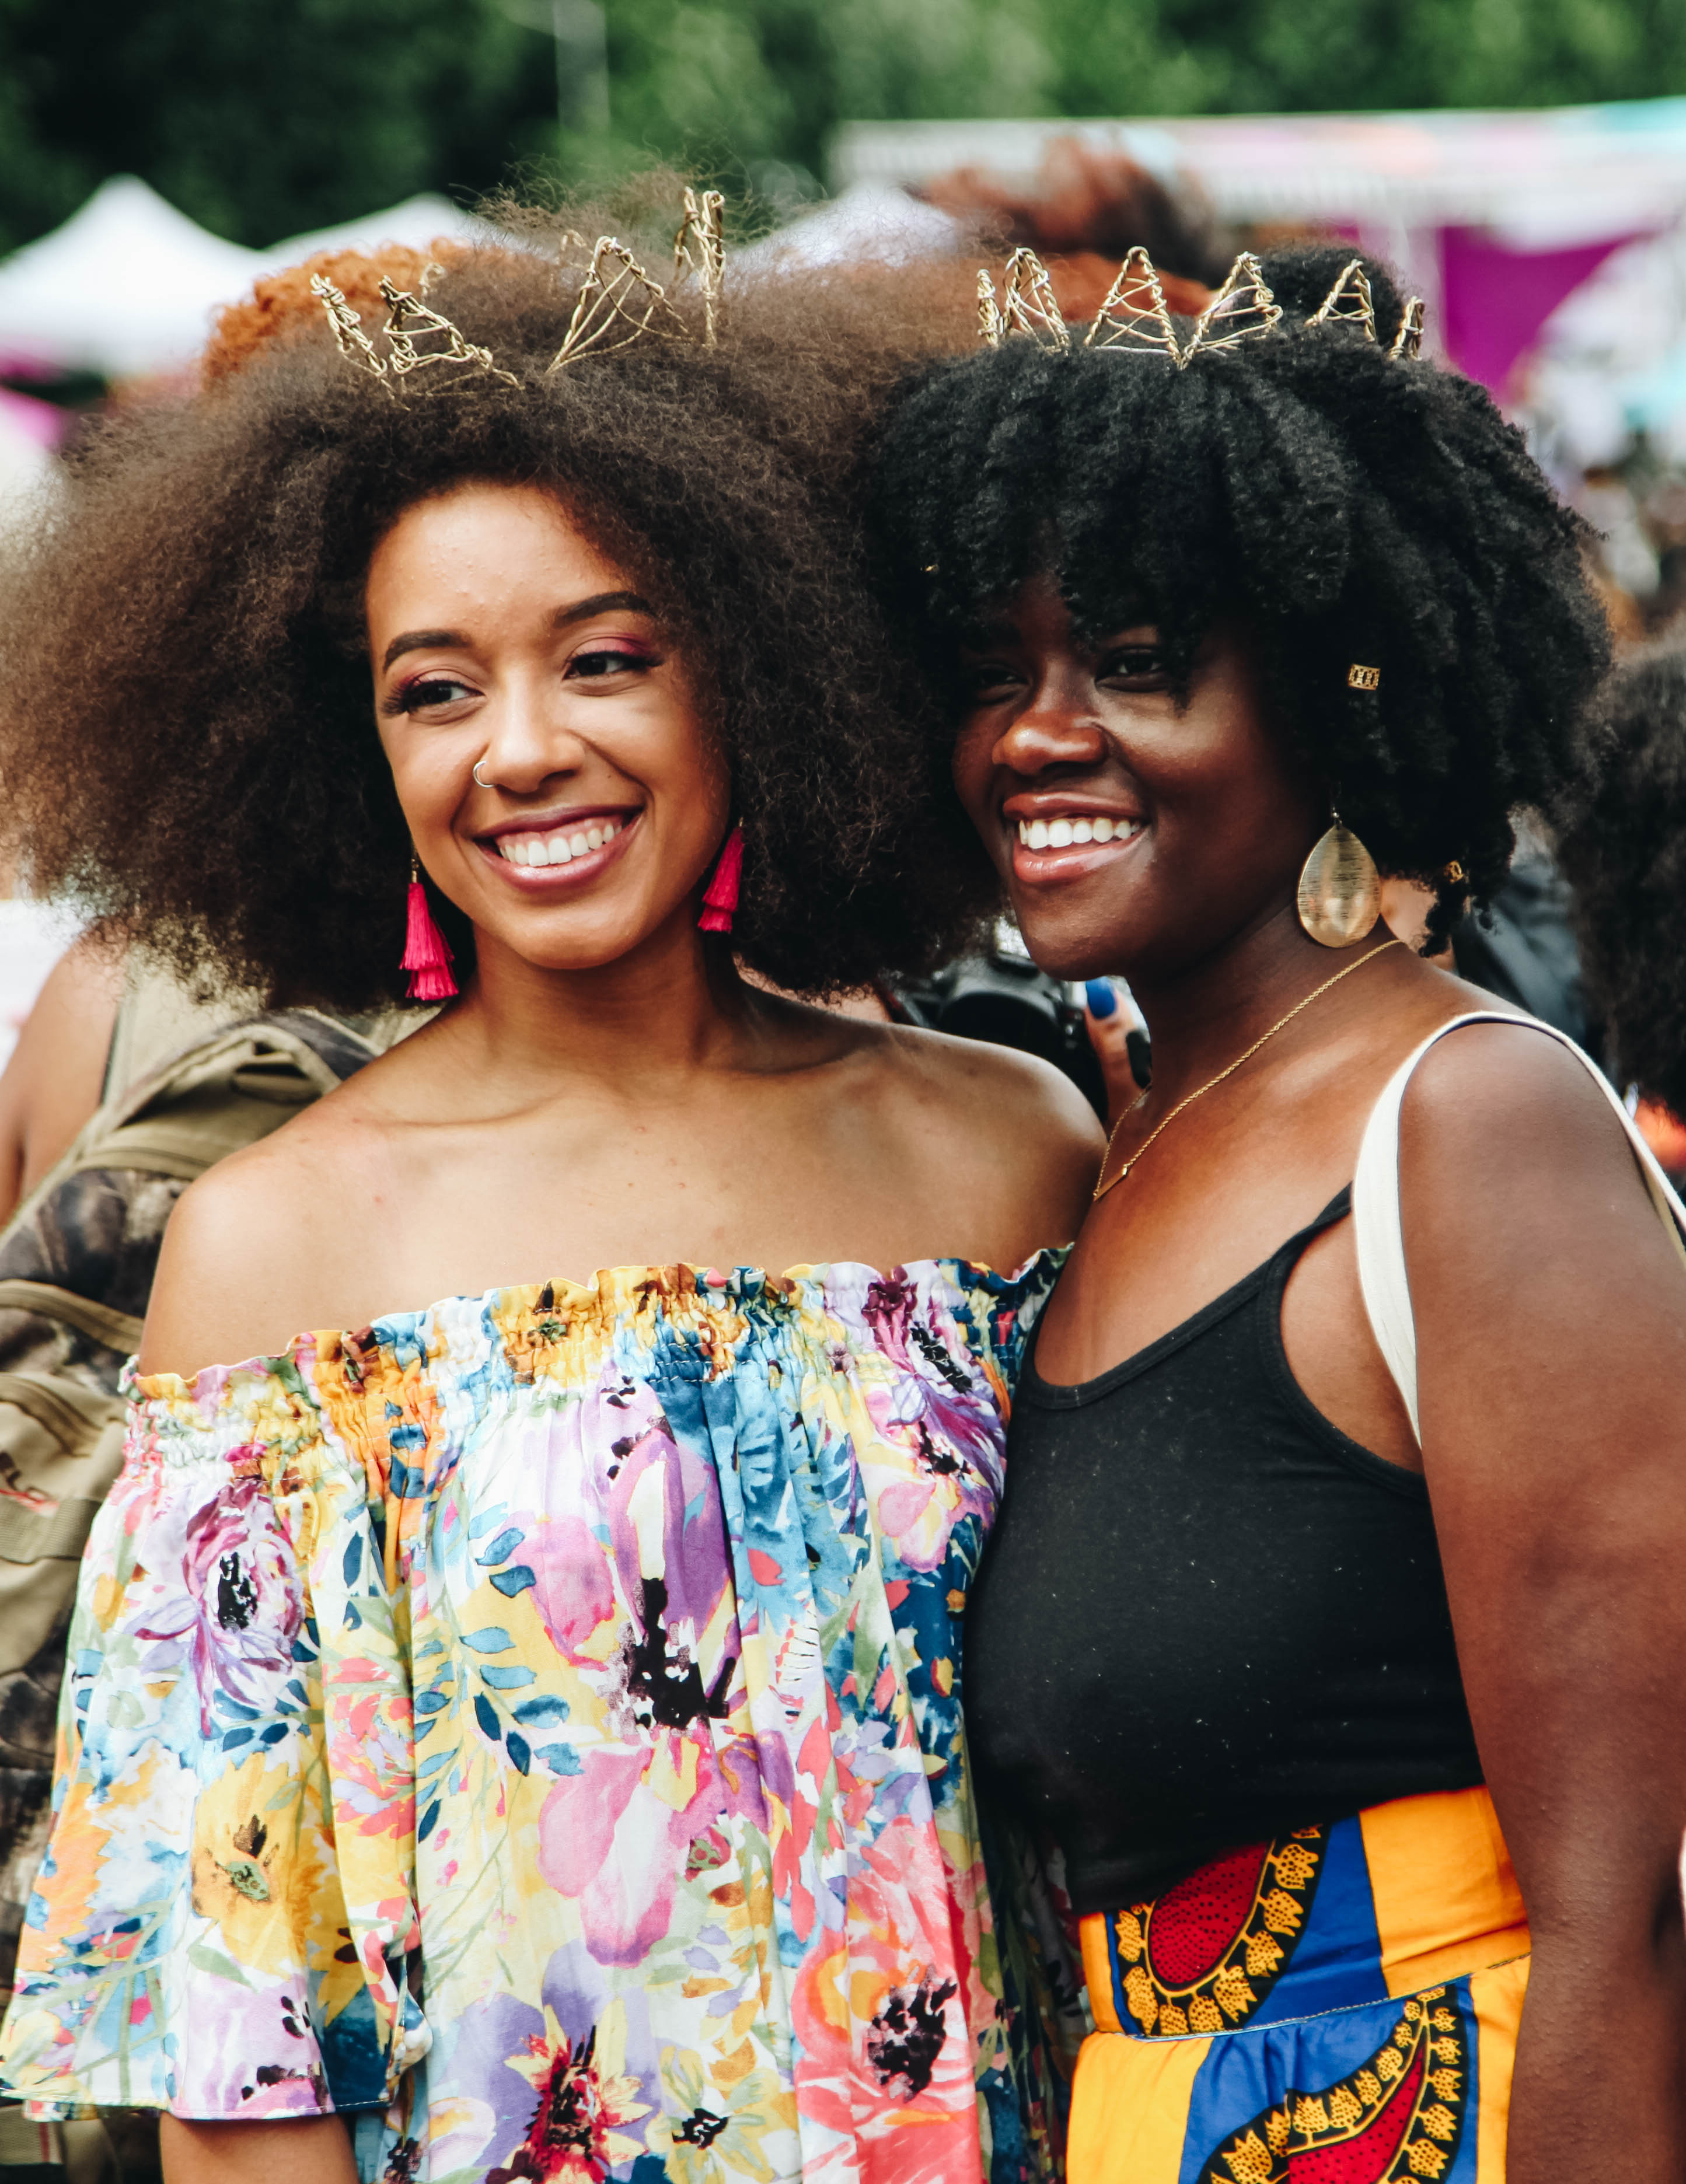 Curls, Curls, and More Curls! All the Amazing Looks From This Year's CurlFest 
